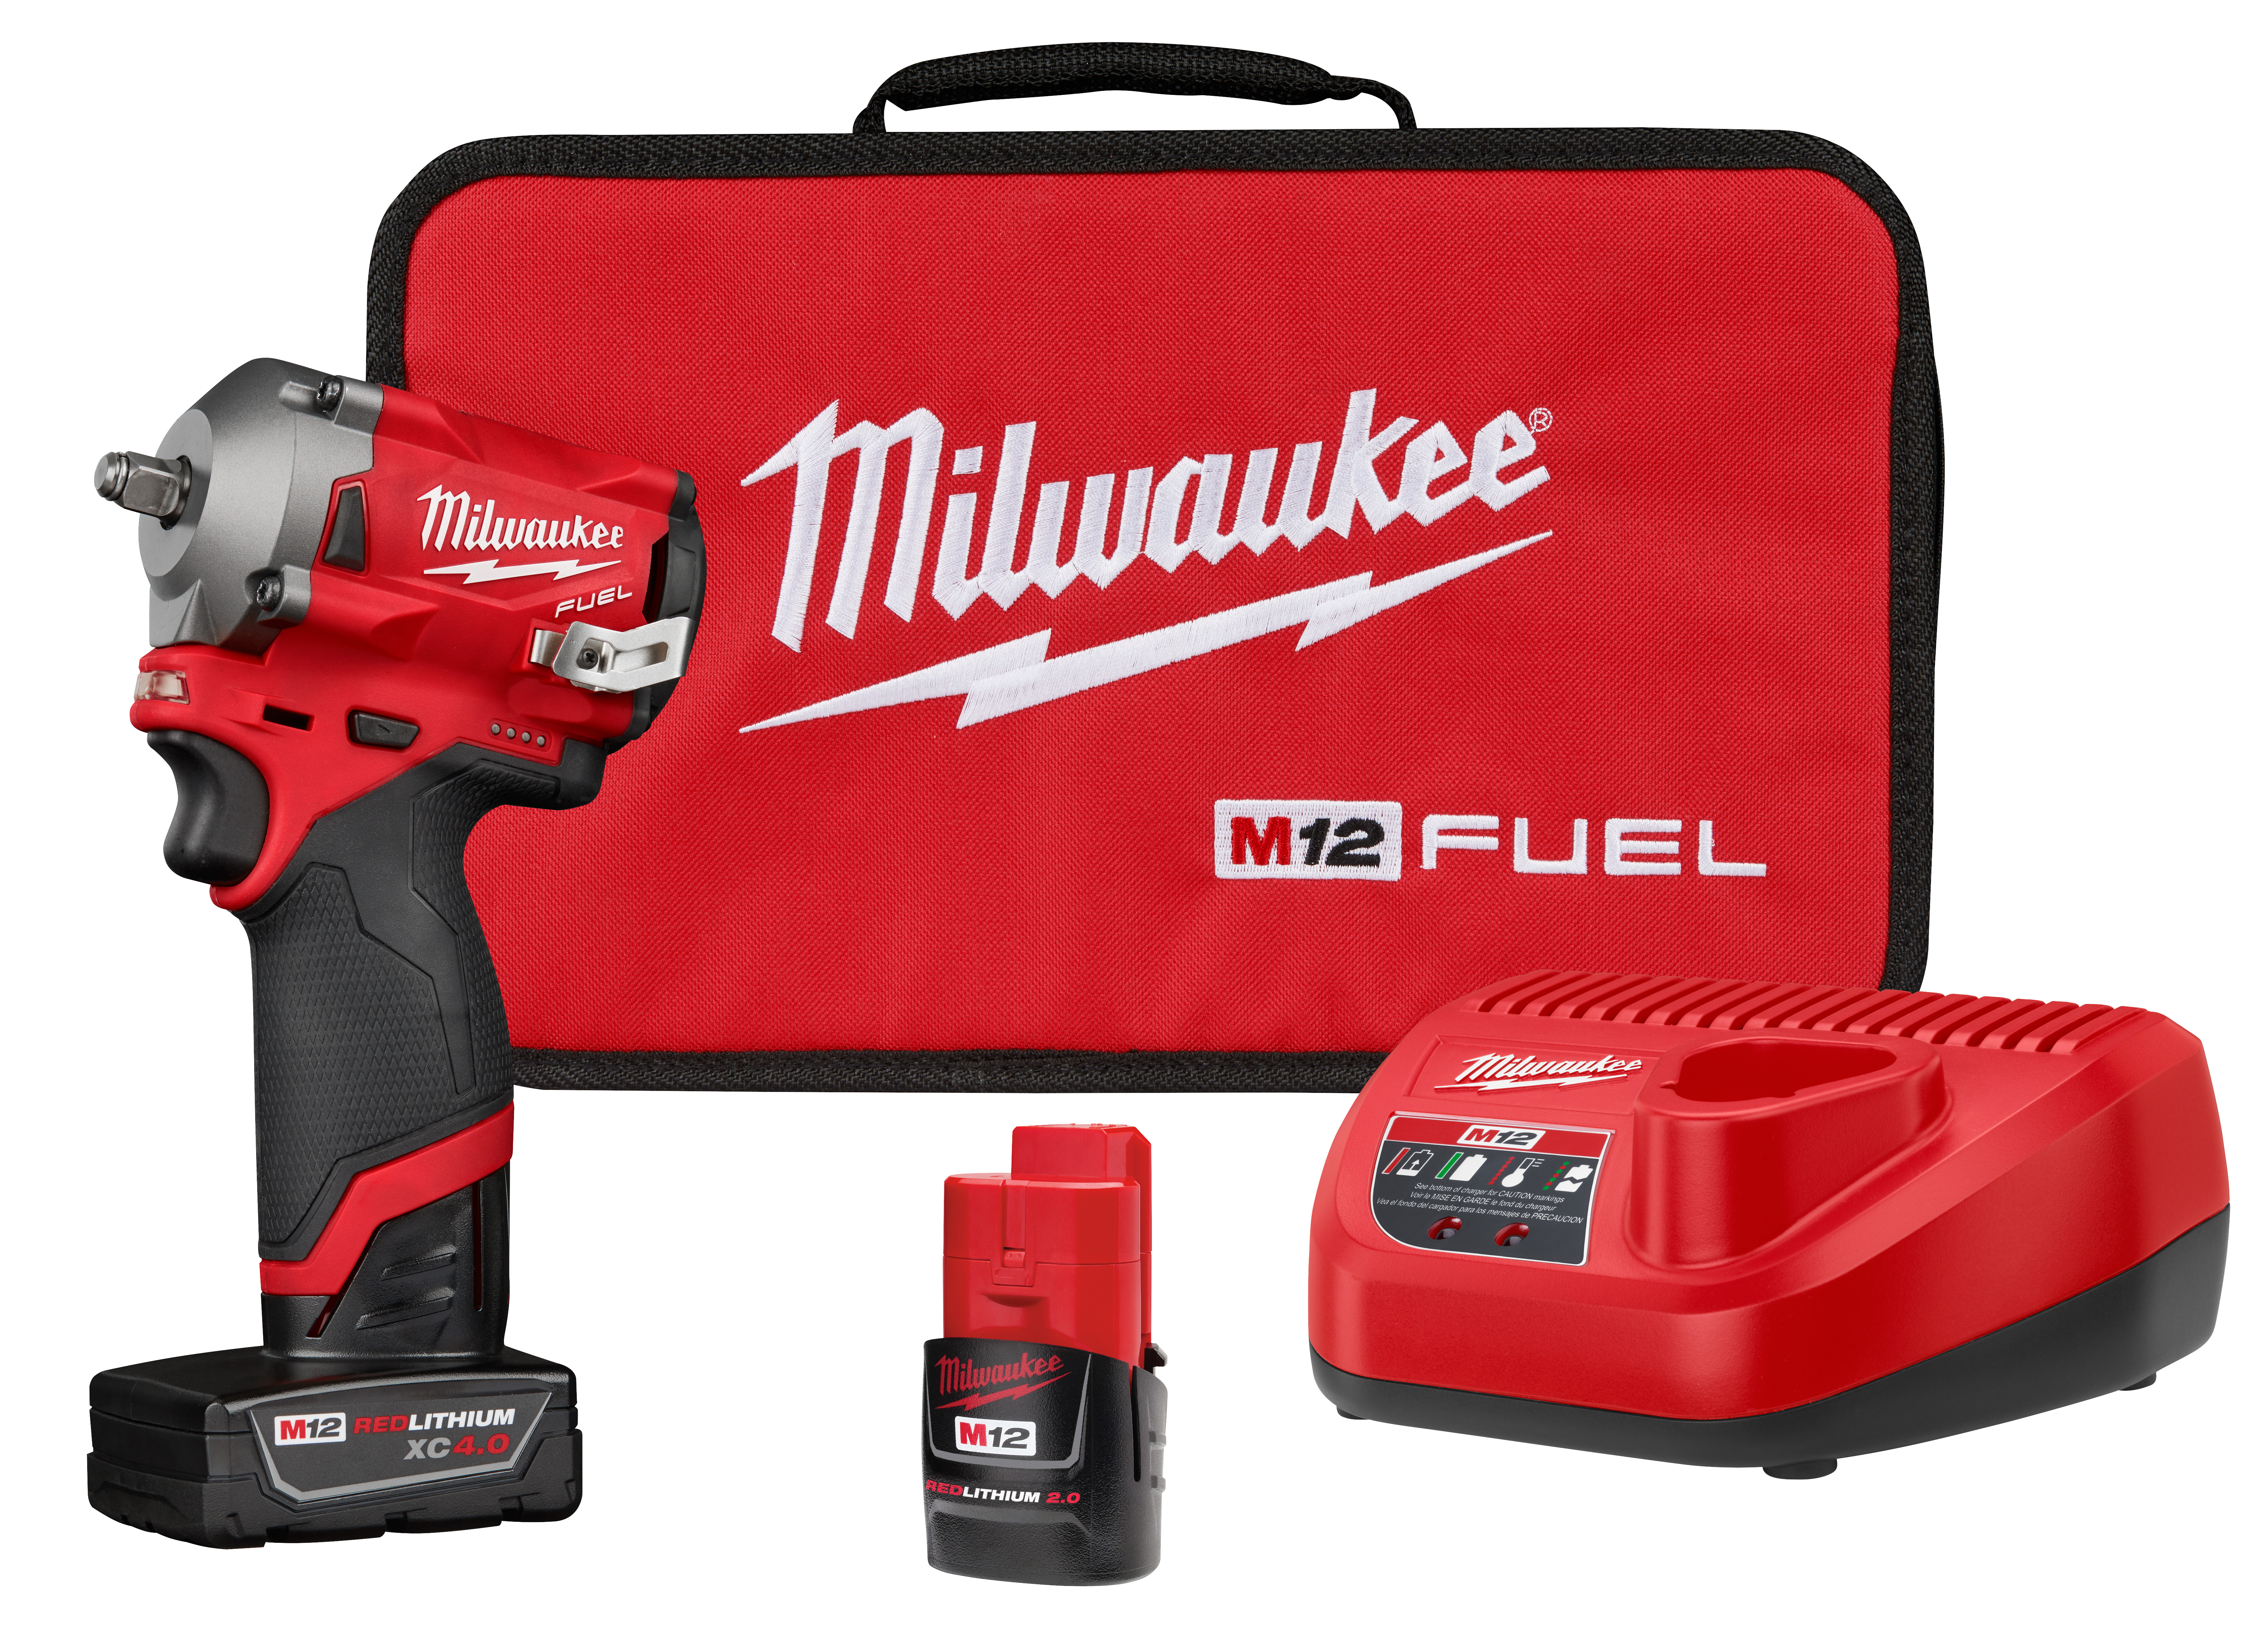 Milwaukee® M12™ 2554-20 Stubby Cordless Impact Wrench, 3/8 in Straight Drive, 3200 bpm, 250 ft-lb Torque, 12 VDC, 4.8 in OAL